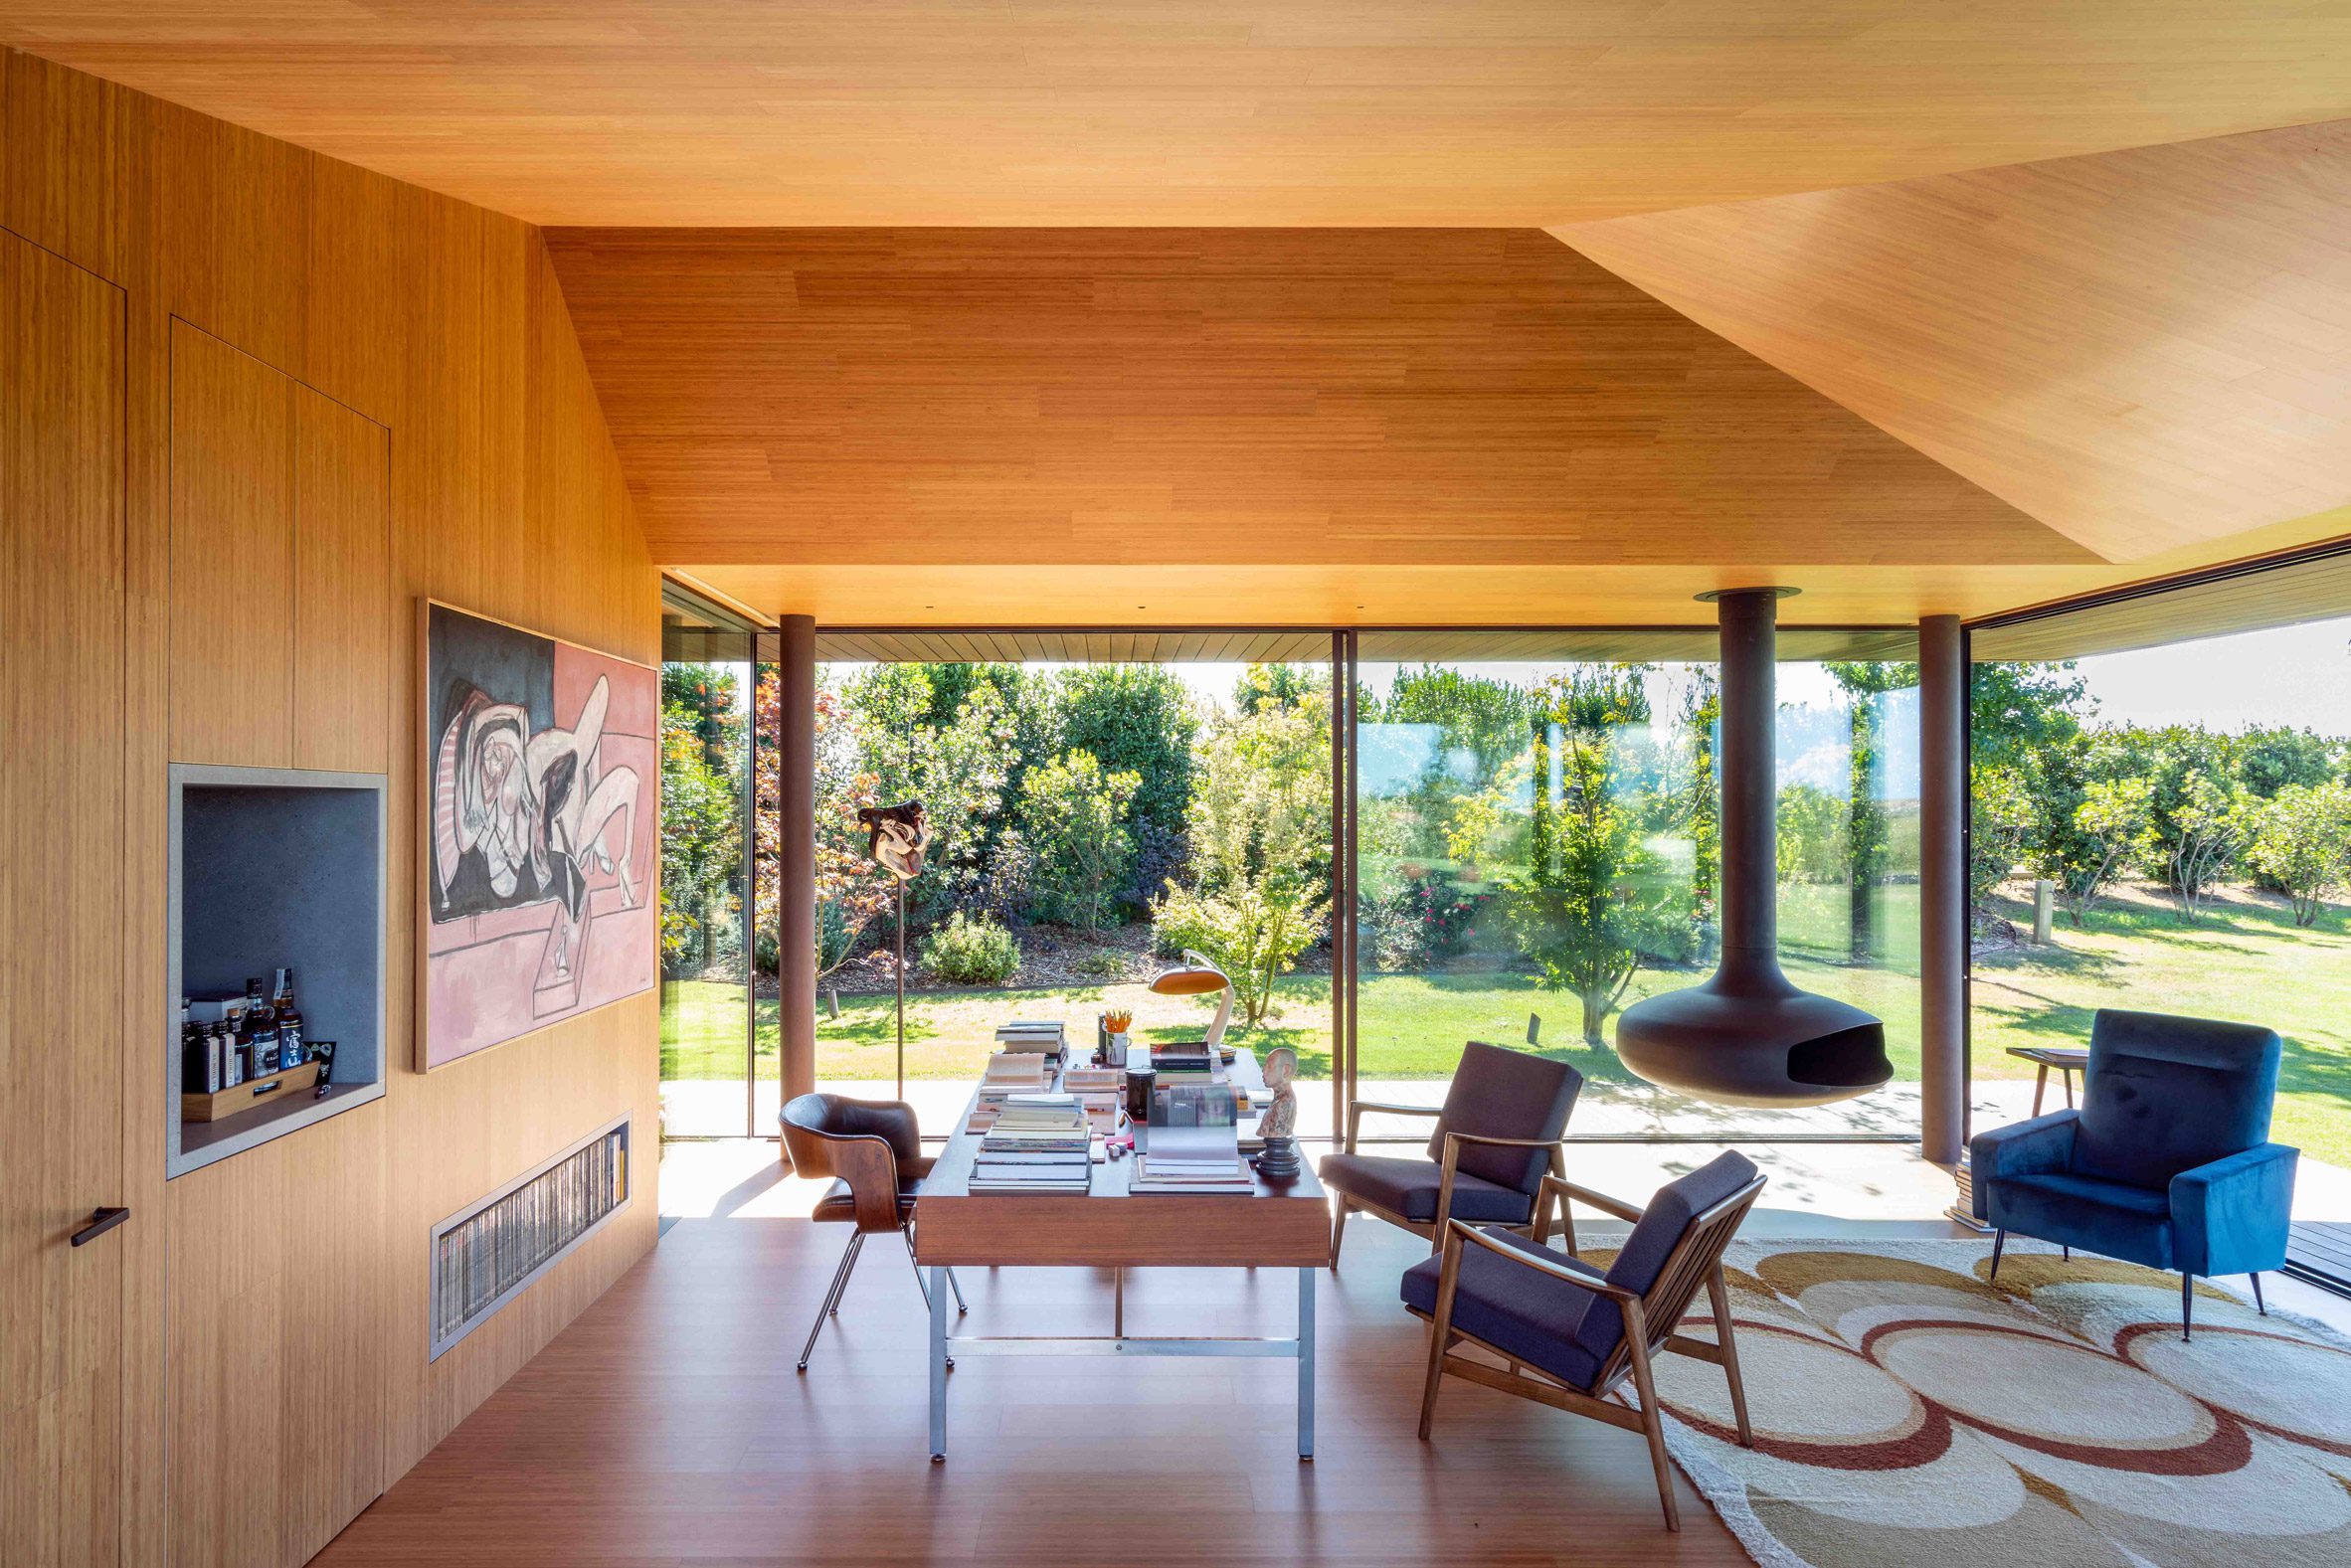 Interior and ceilings of a Spanish pool house in Cantabria